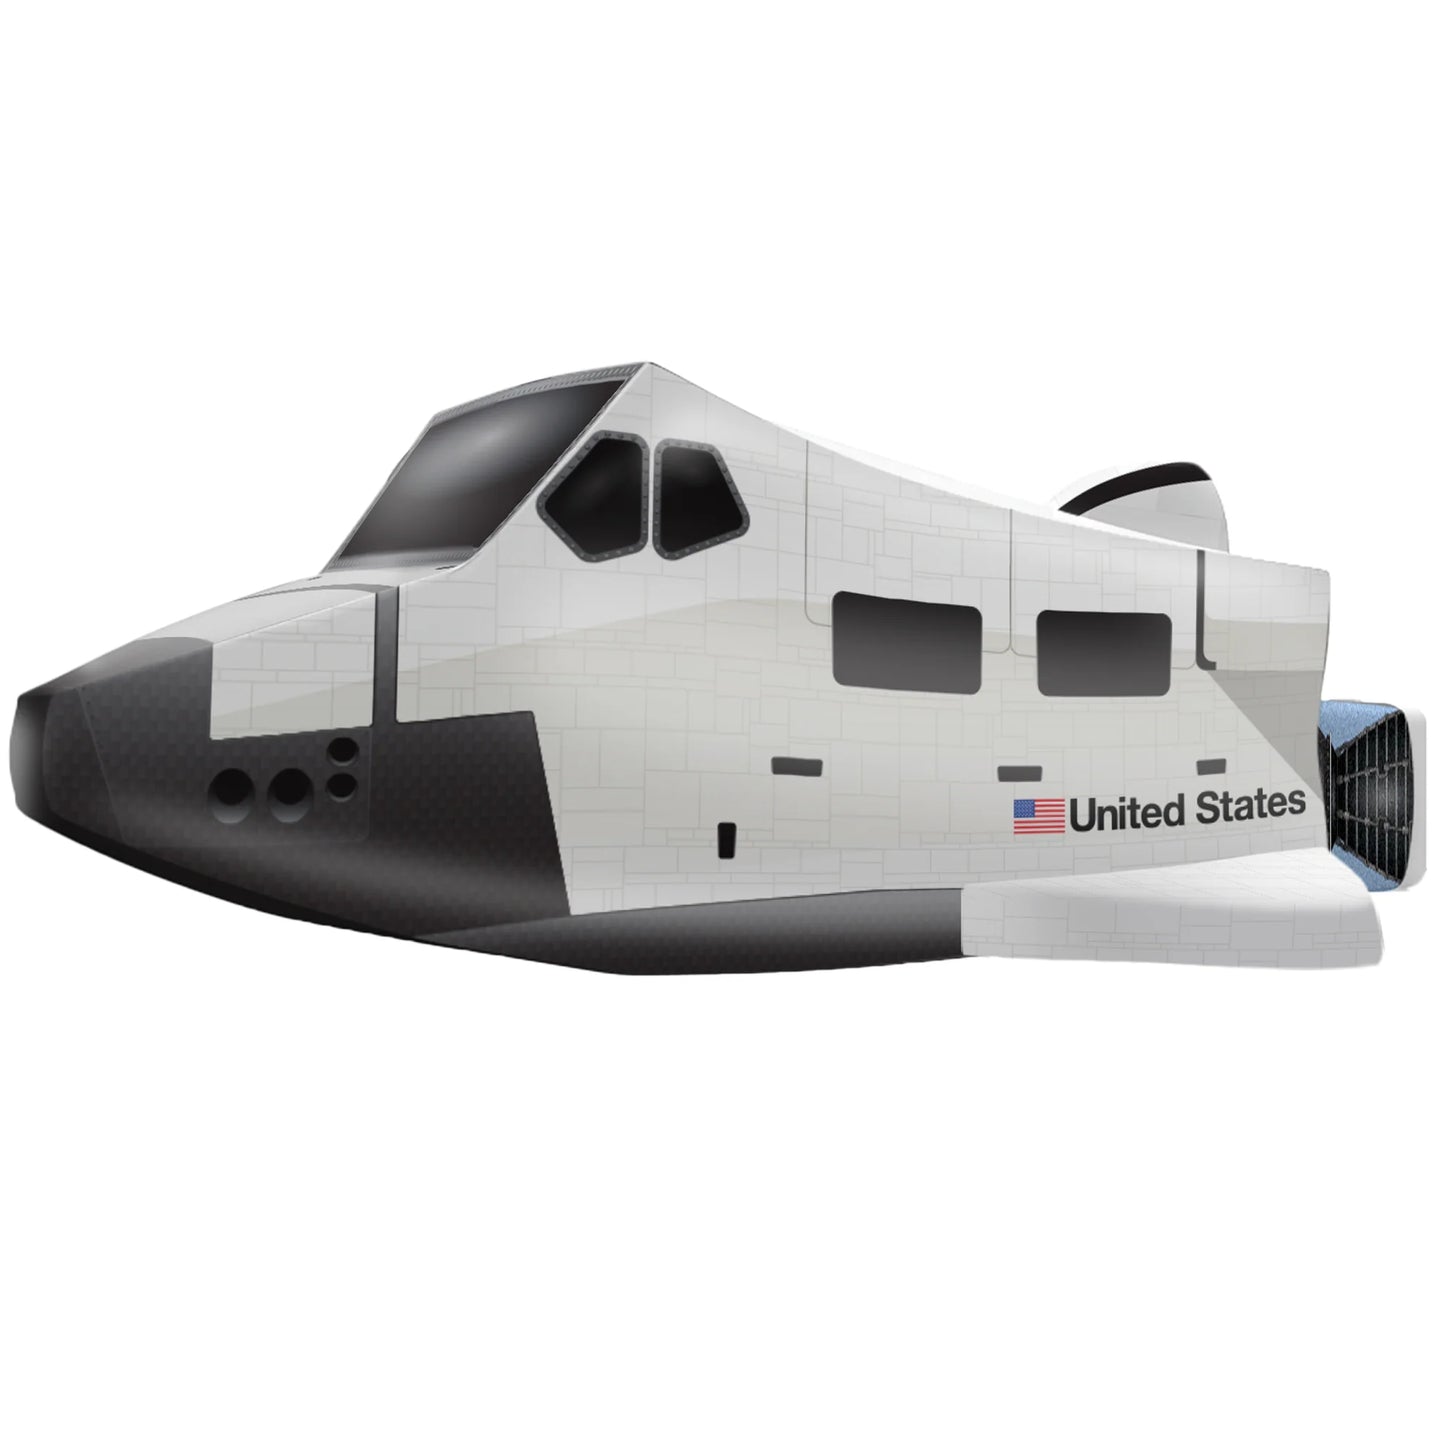 Airfort Space Shuttle